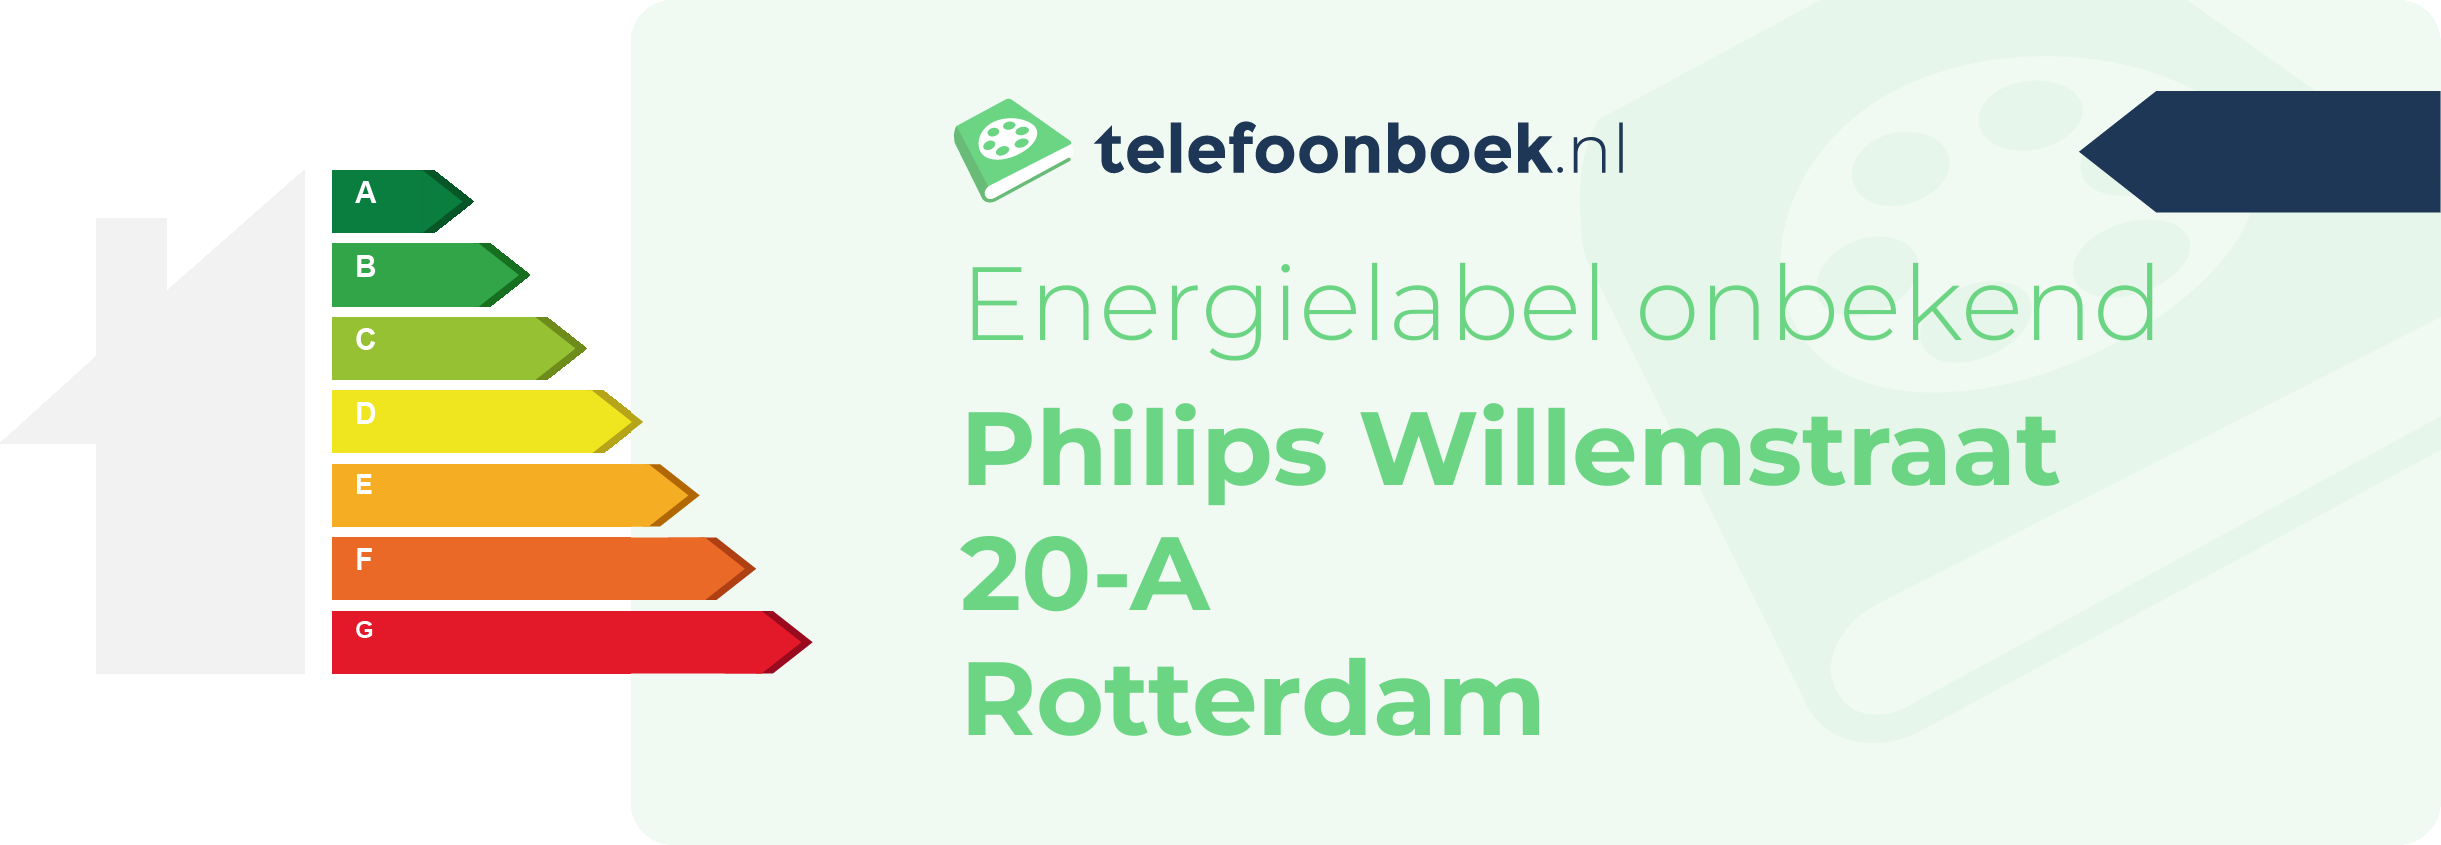 Energielabel Philips Willemstraat 20-A Rotterdam